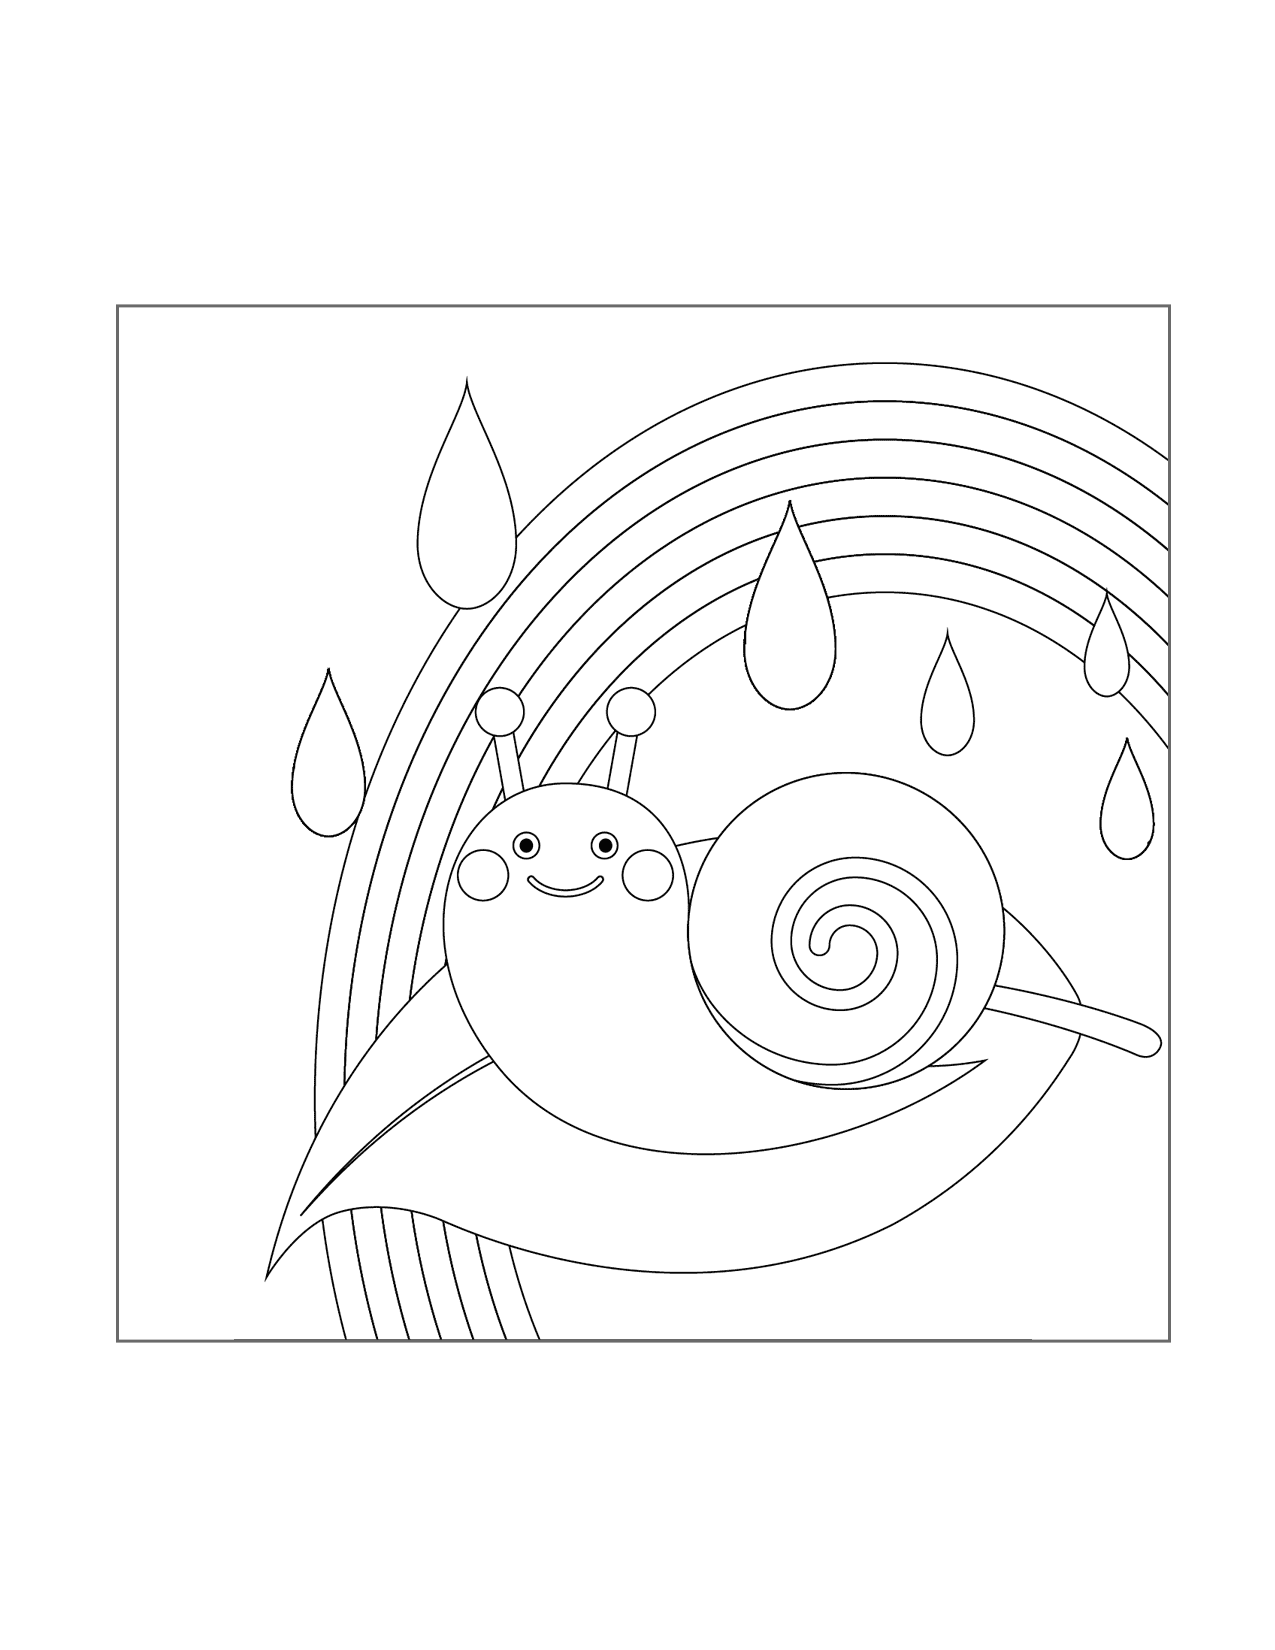 Snail In The Rain Coloring Page